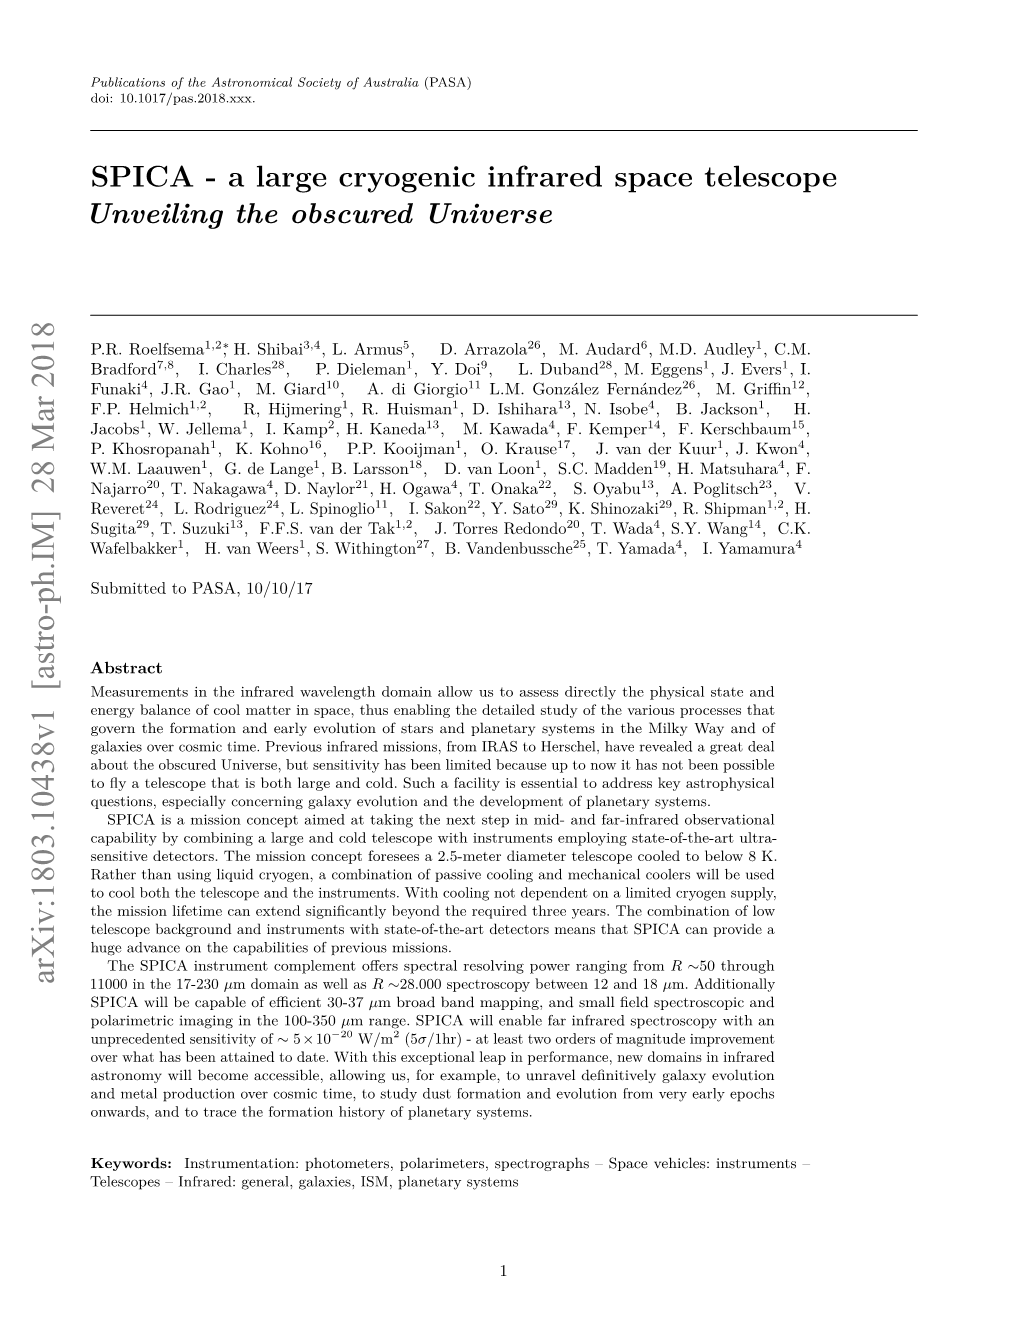 SPICA-A Large Cryogenic Infrared Space Telescope Unveiling the Obscured Universe